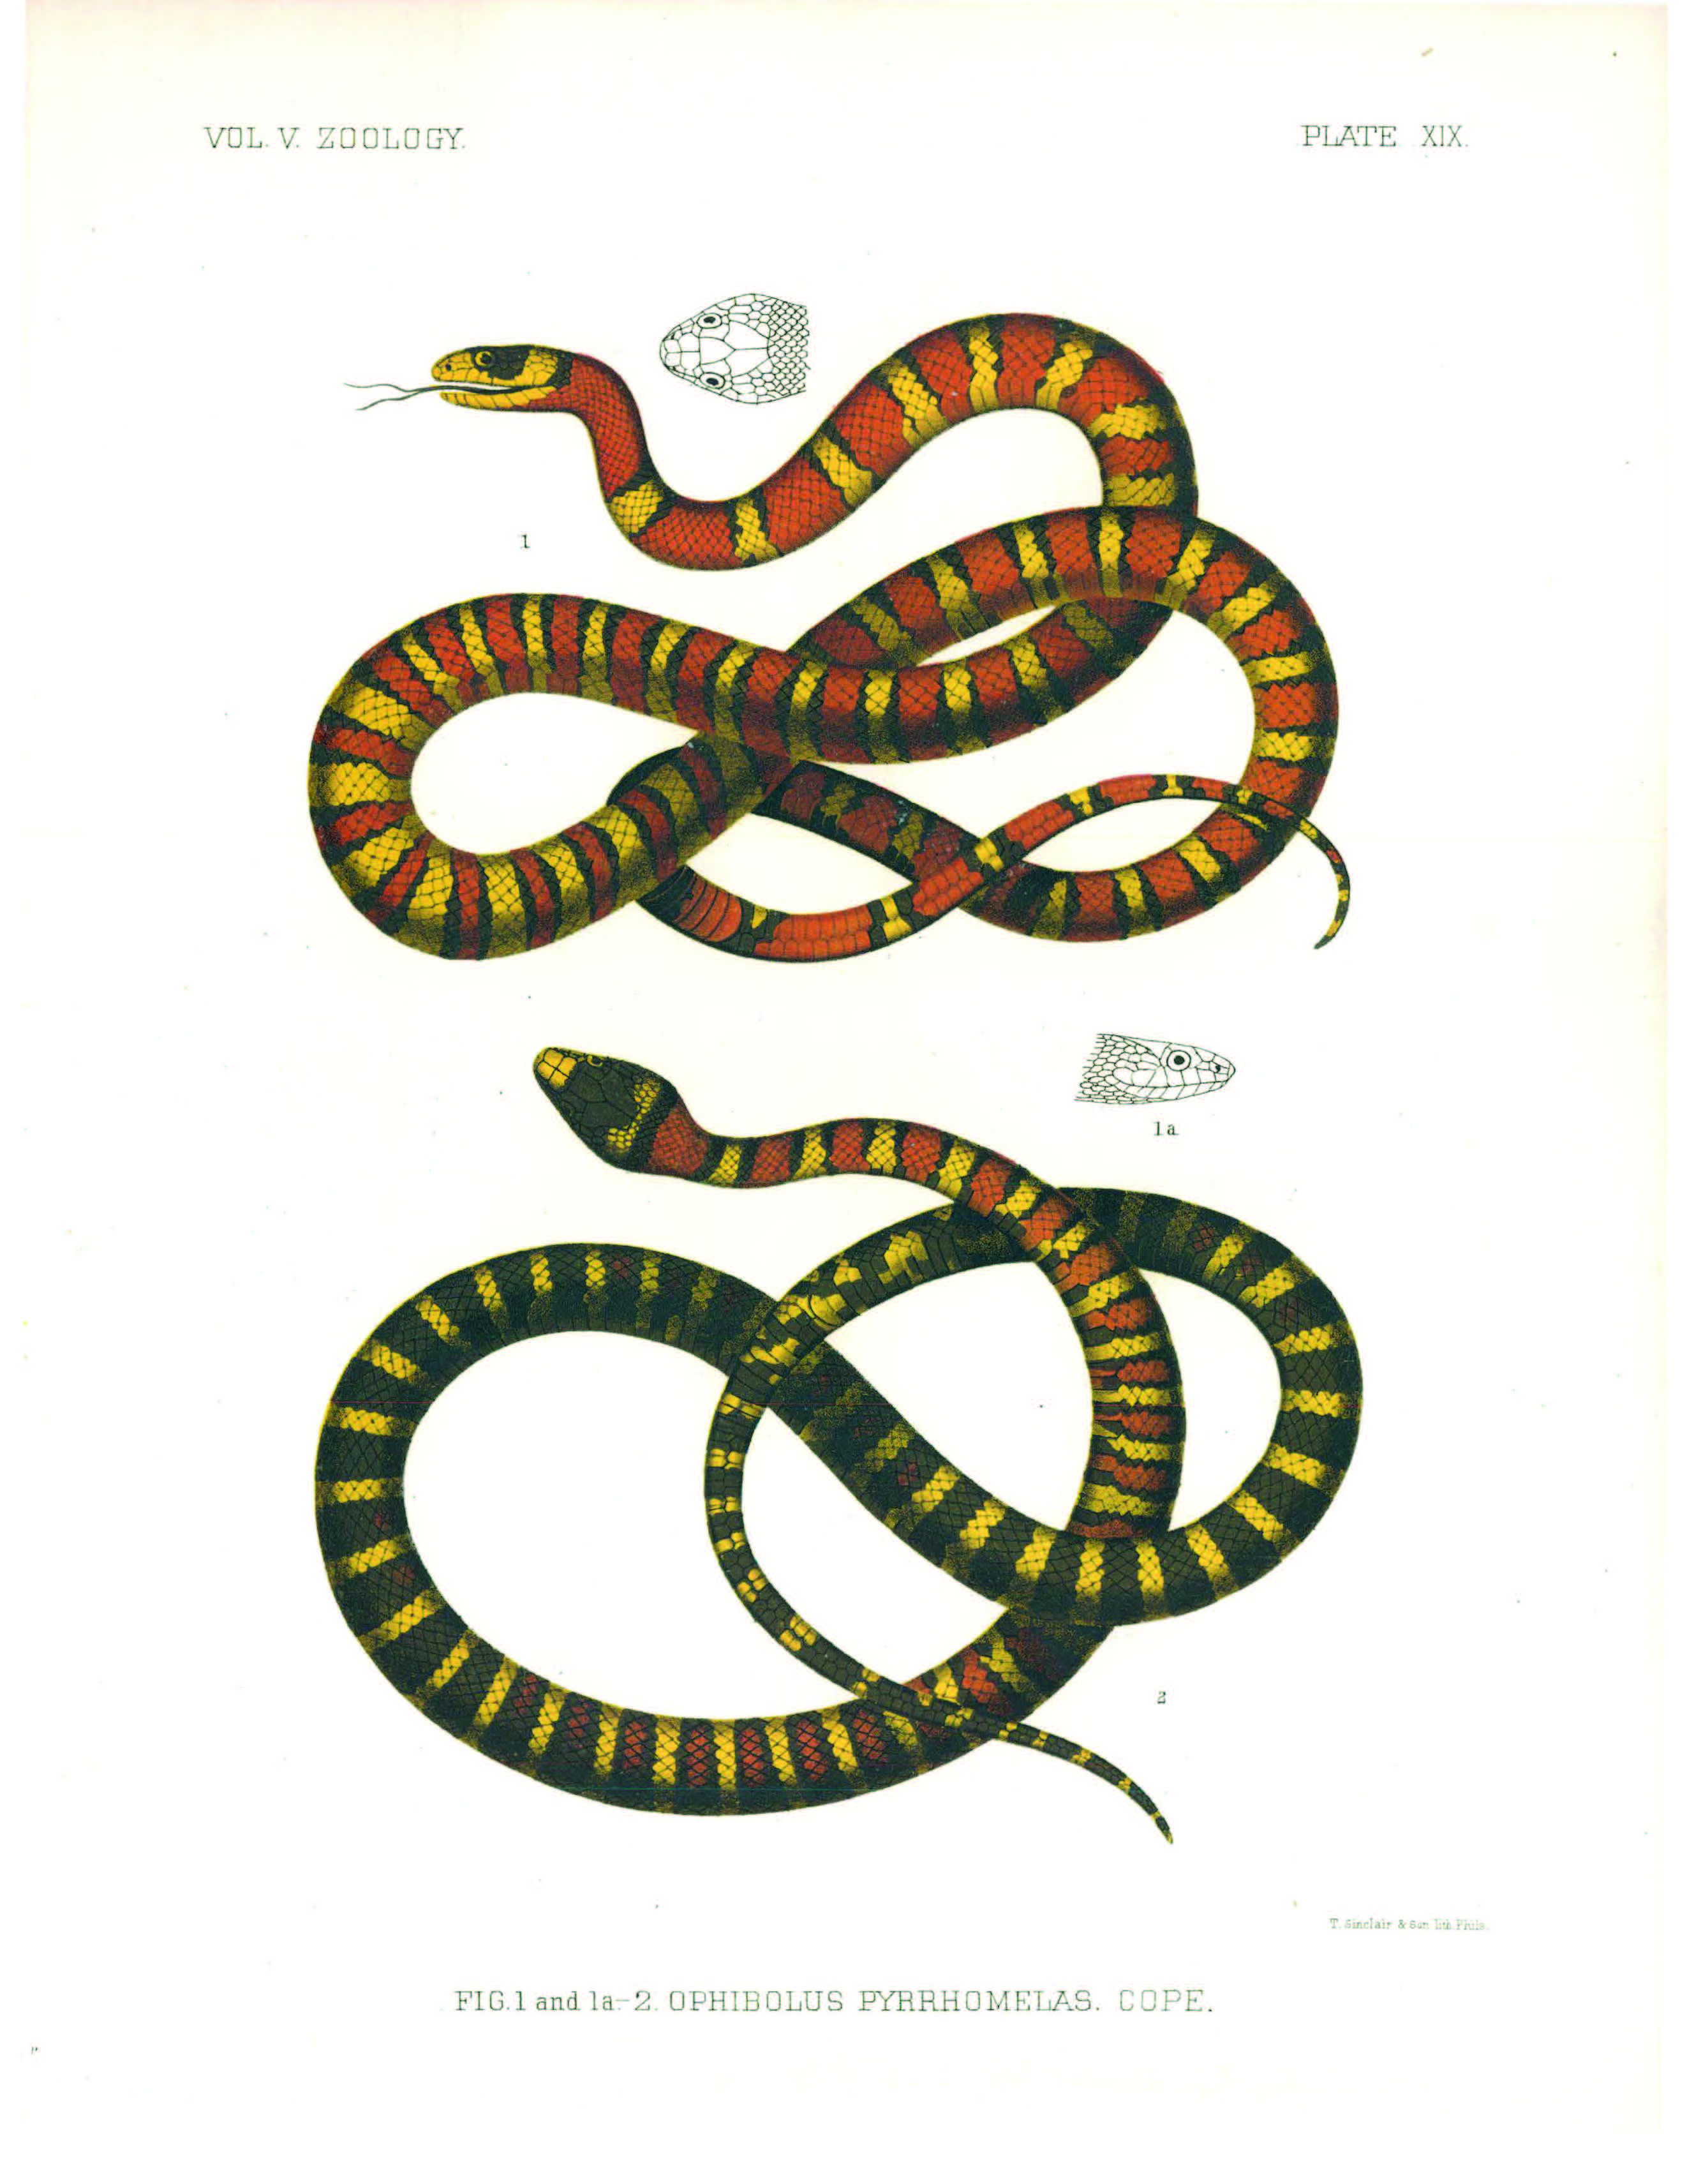 Drawings of two snakes